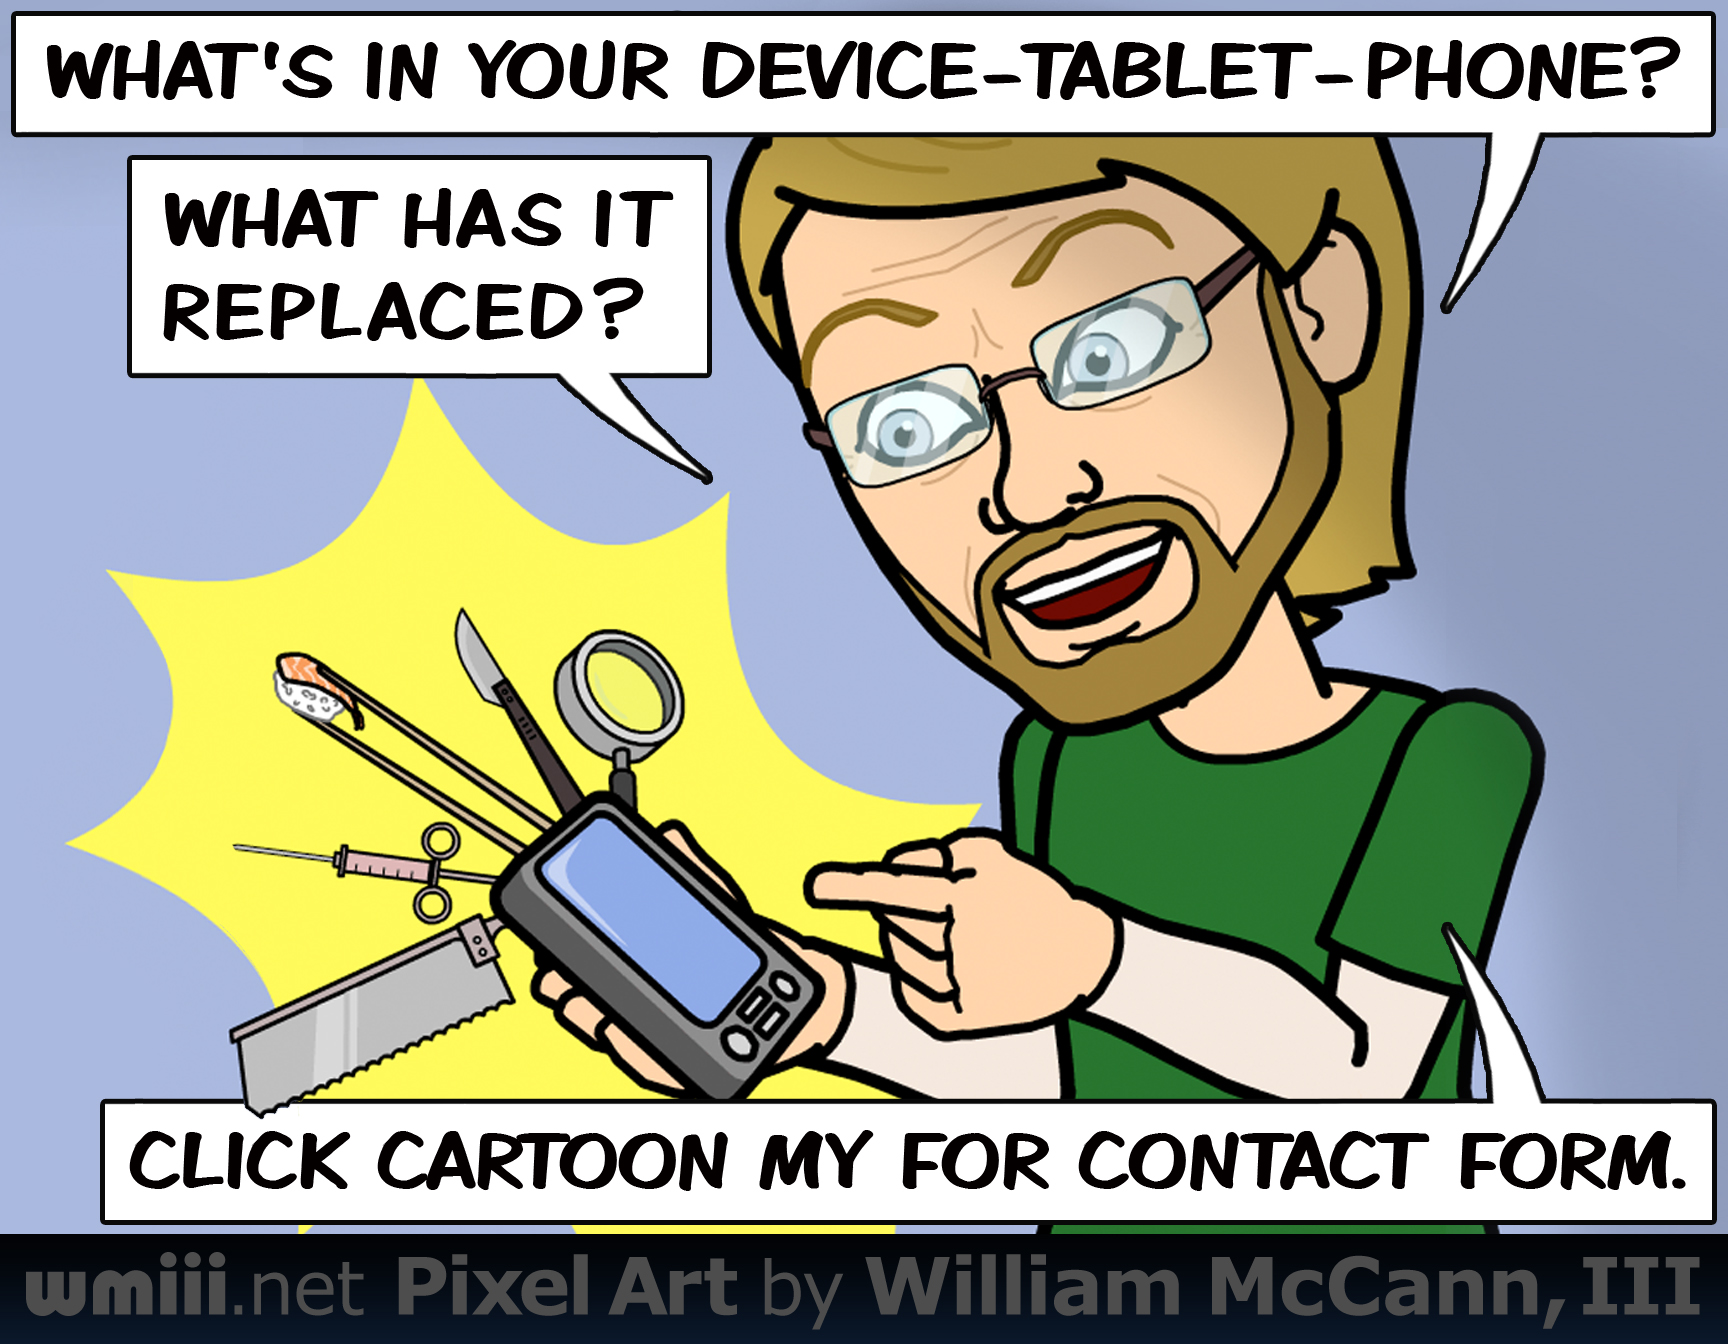 What's in your device?